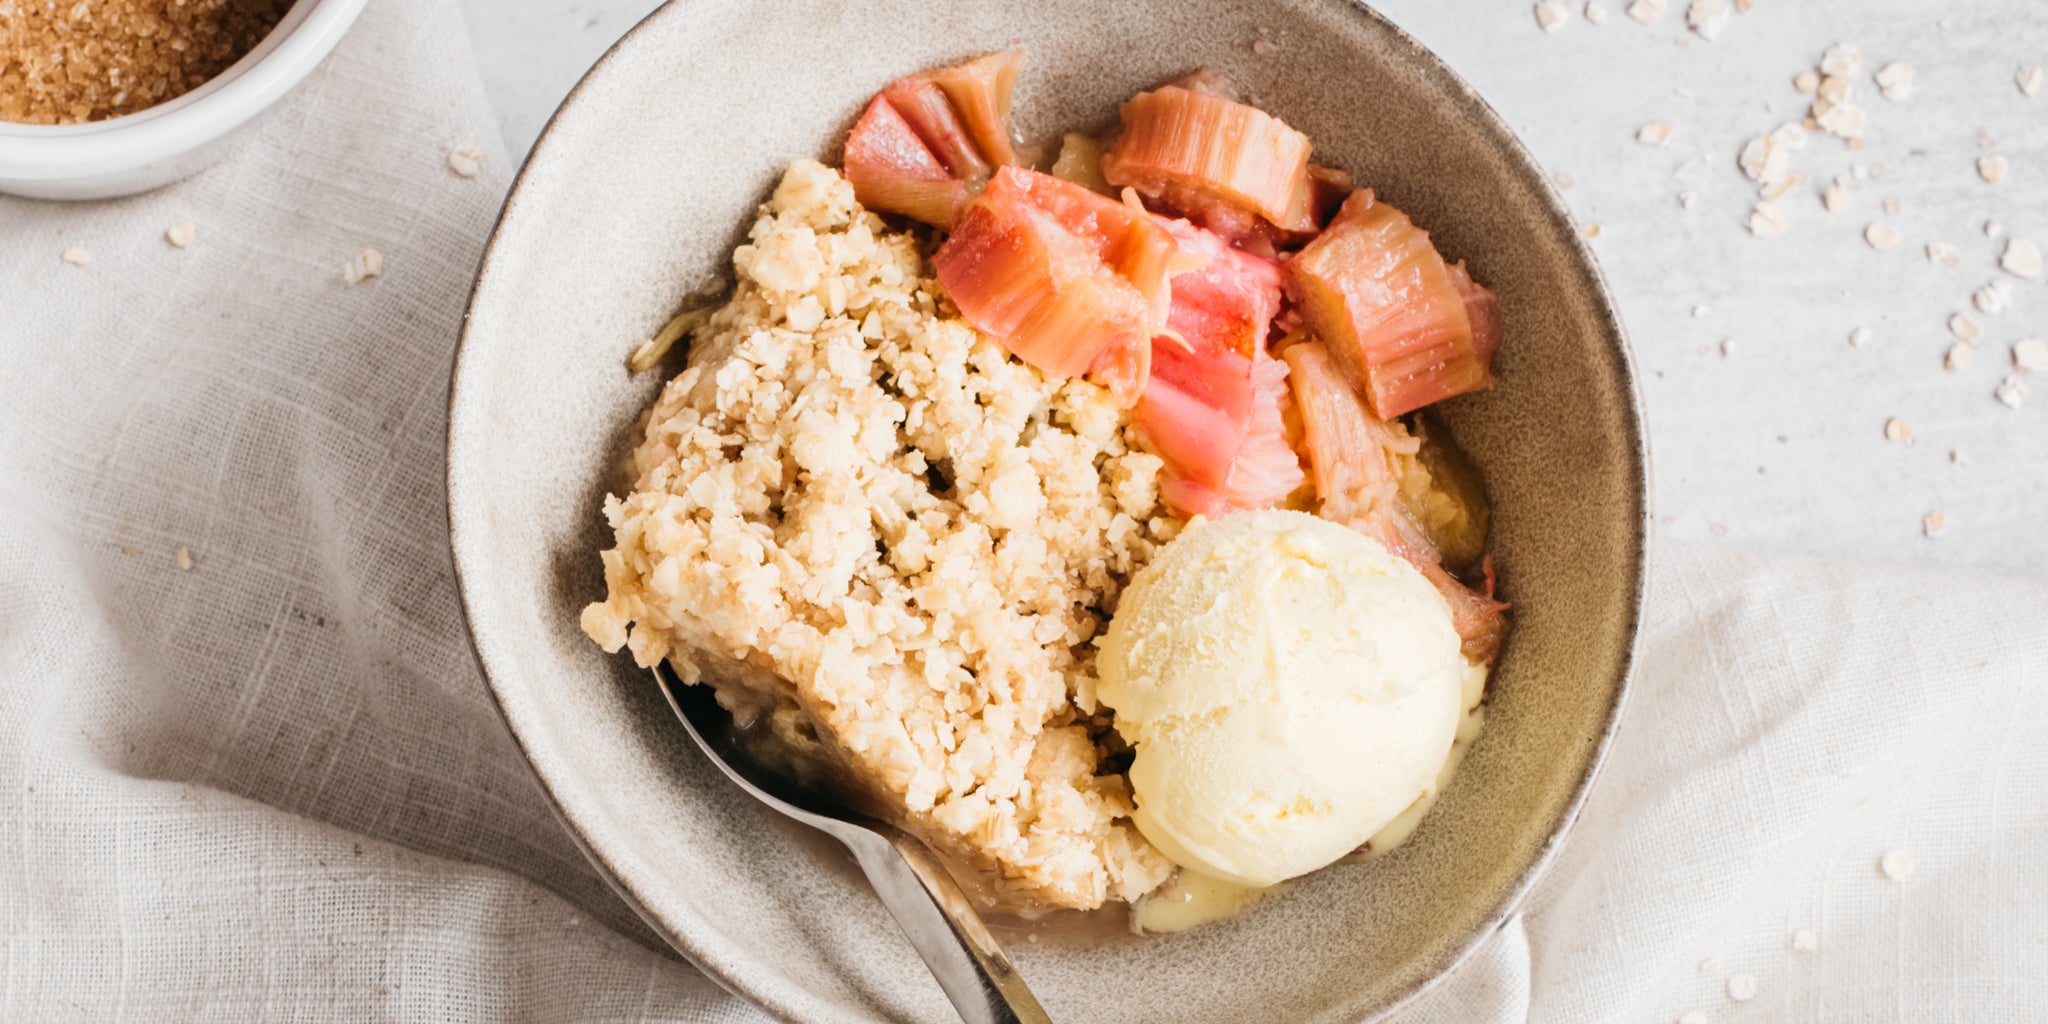 Bowl of rhubarb crumble with scoop of ice cream